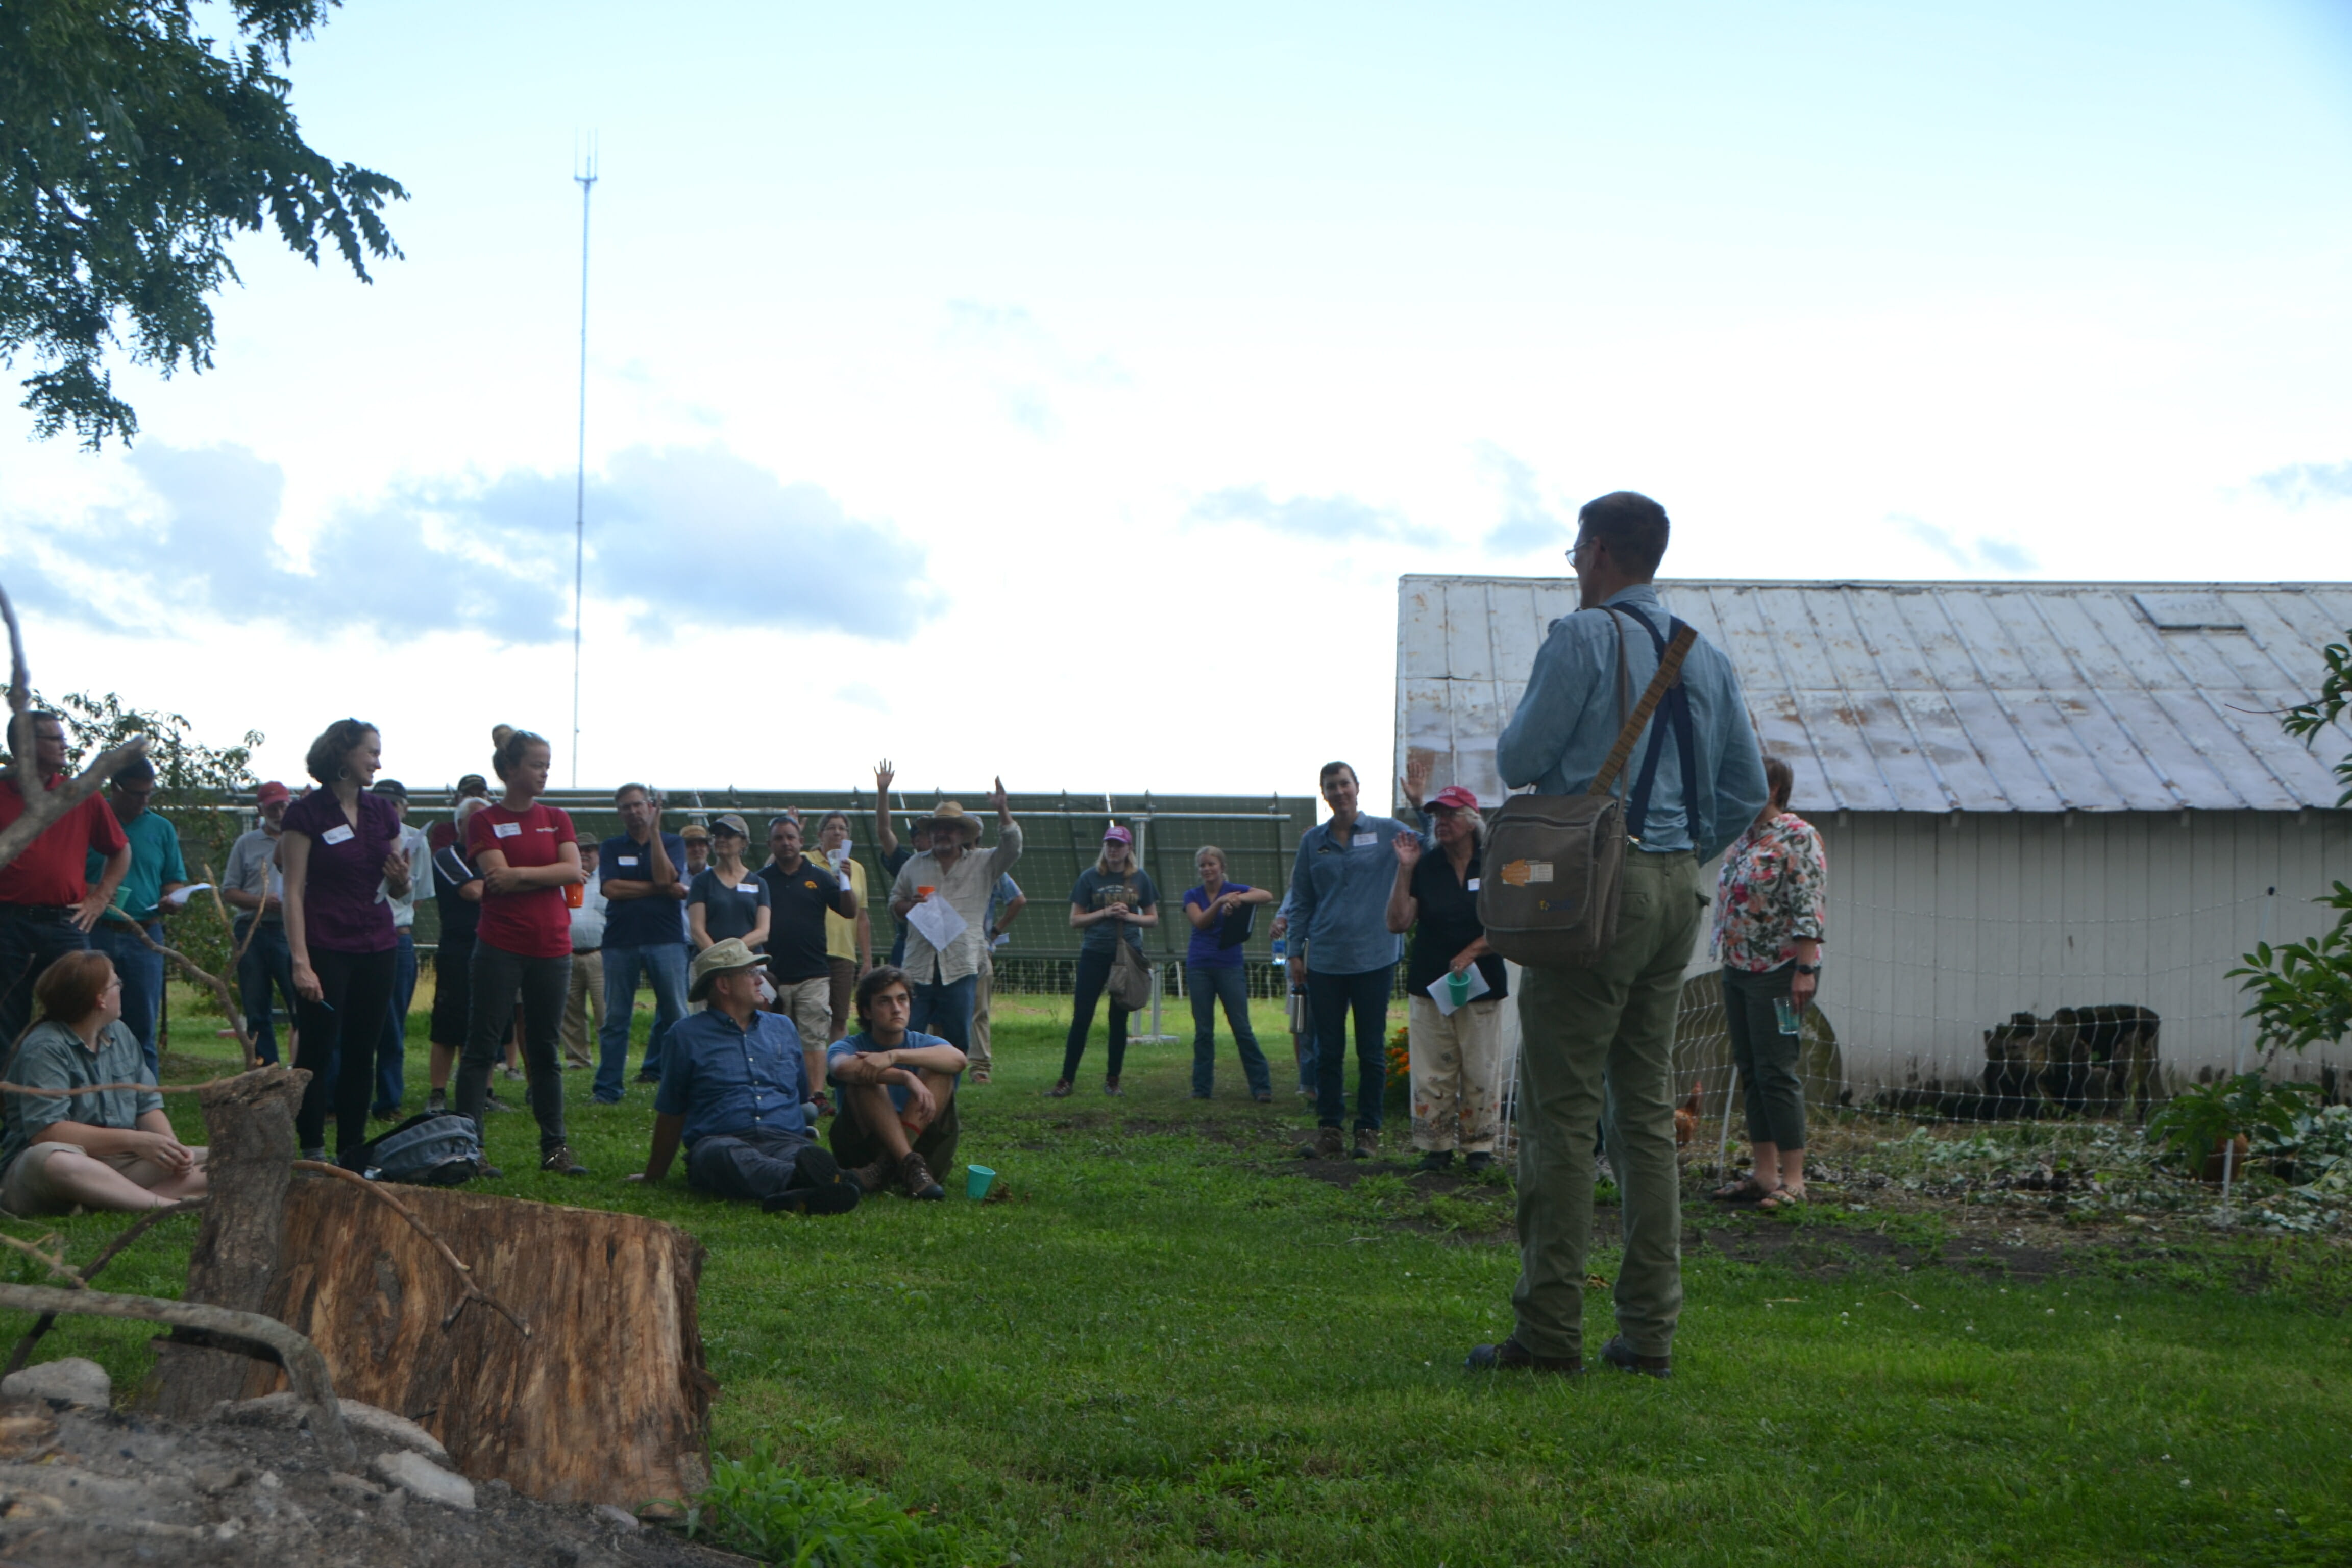 Luke Gran of Prudenterra led a discussion on selecting tree and shrub species for a windbreak.